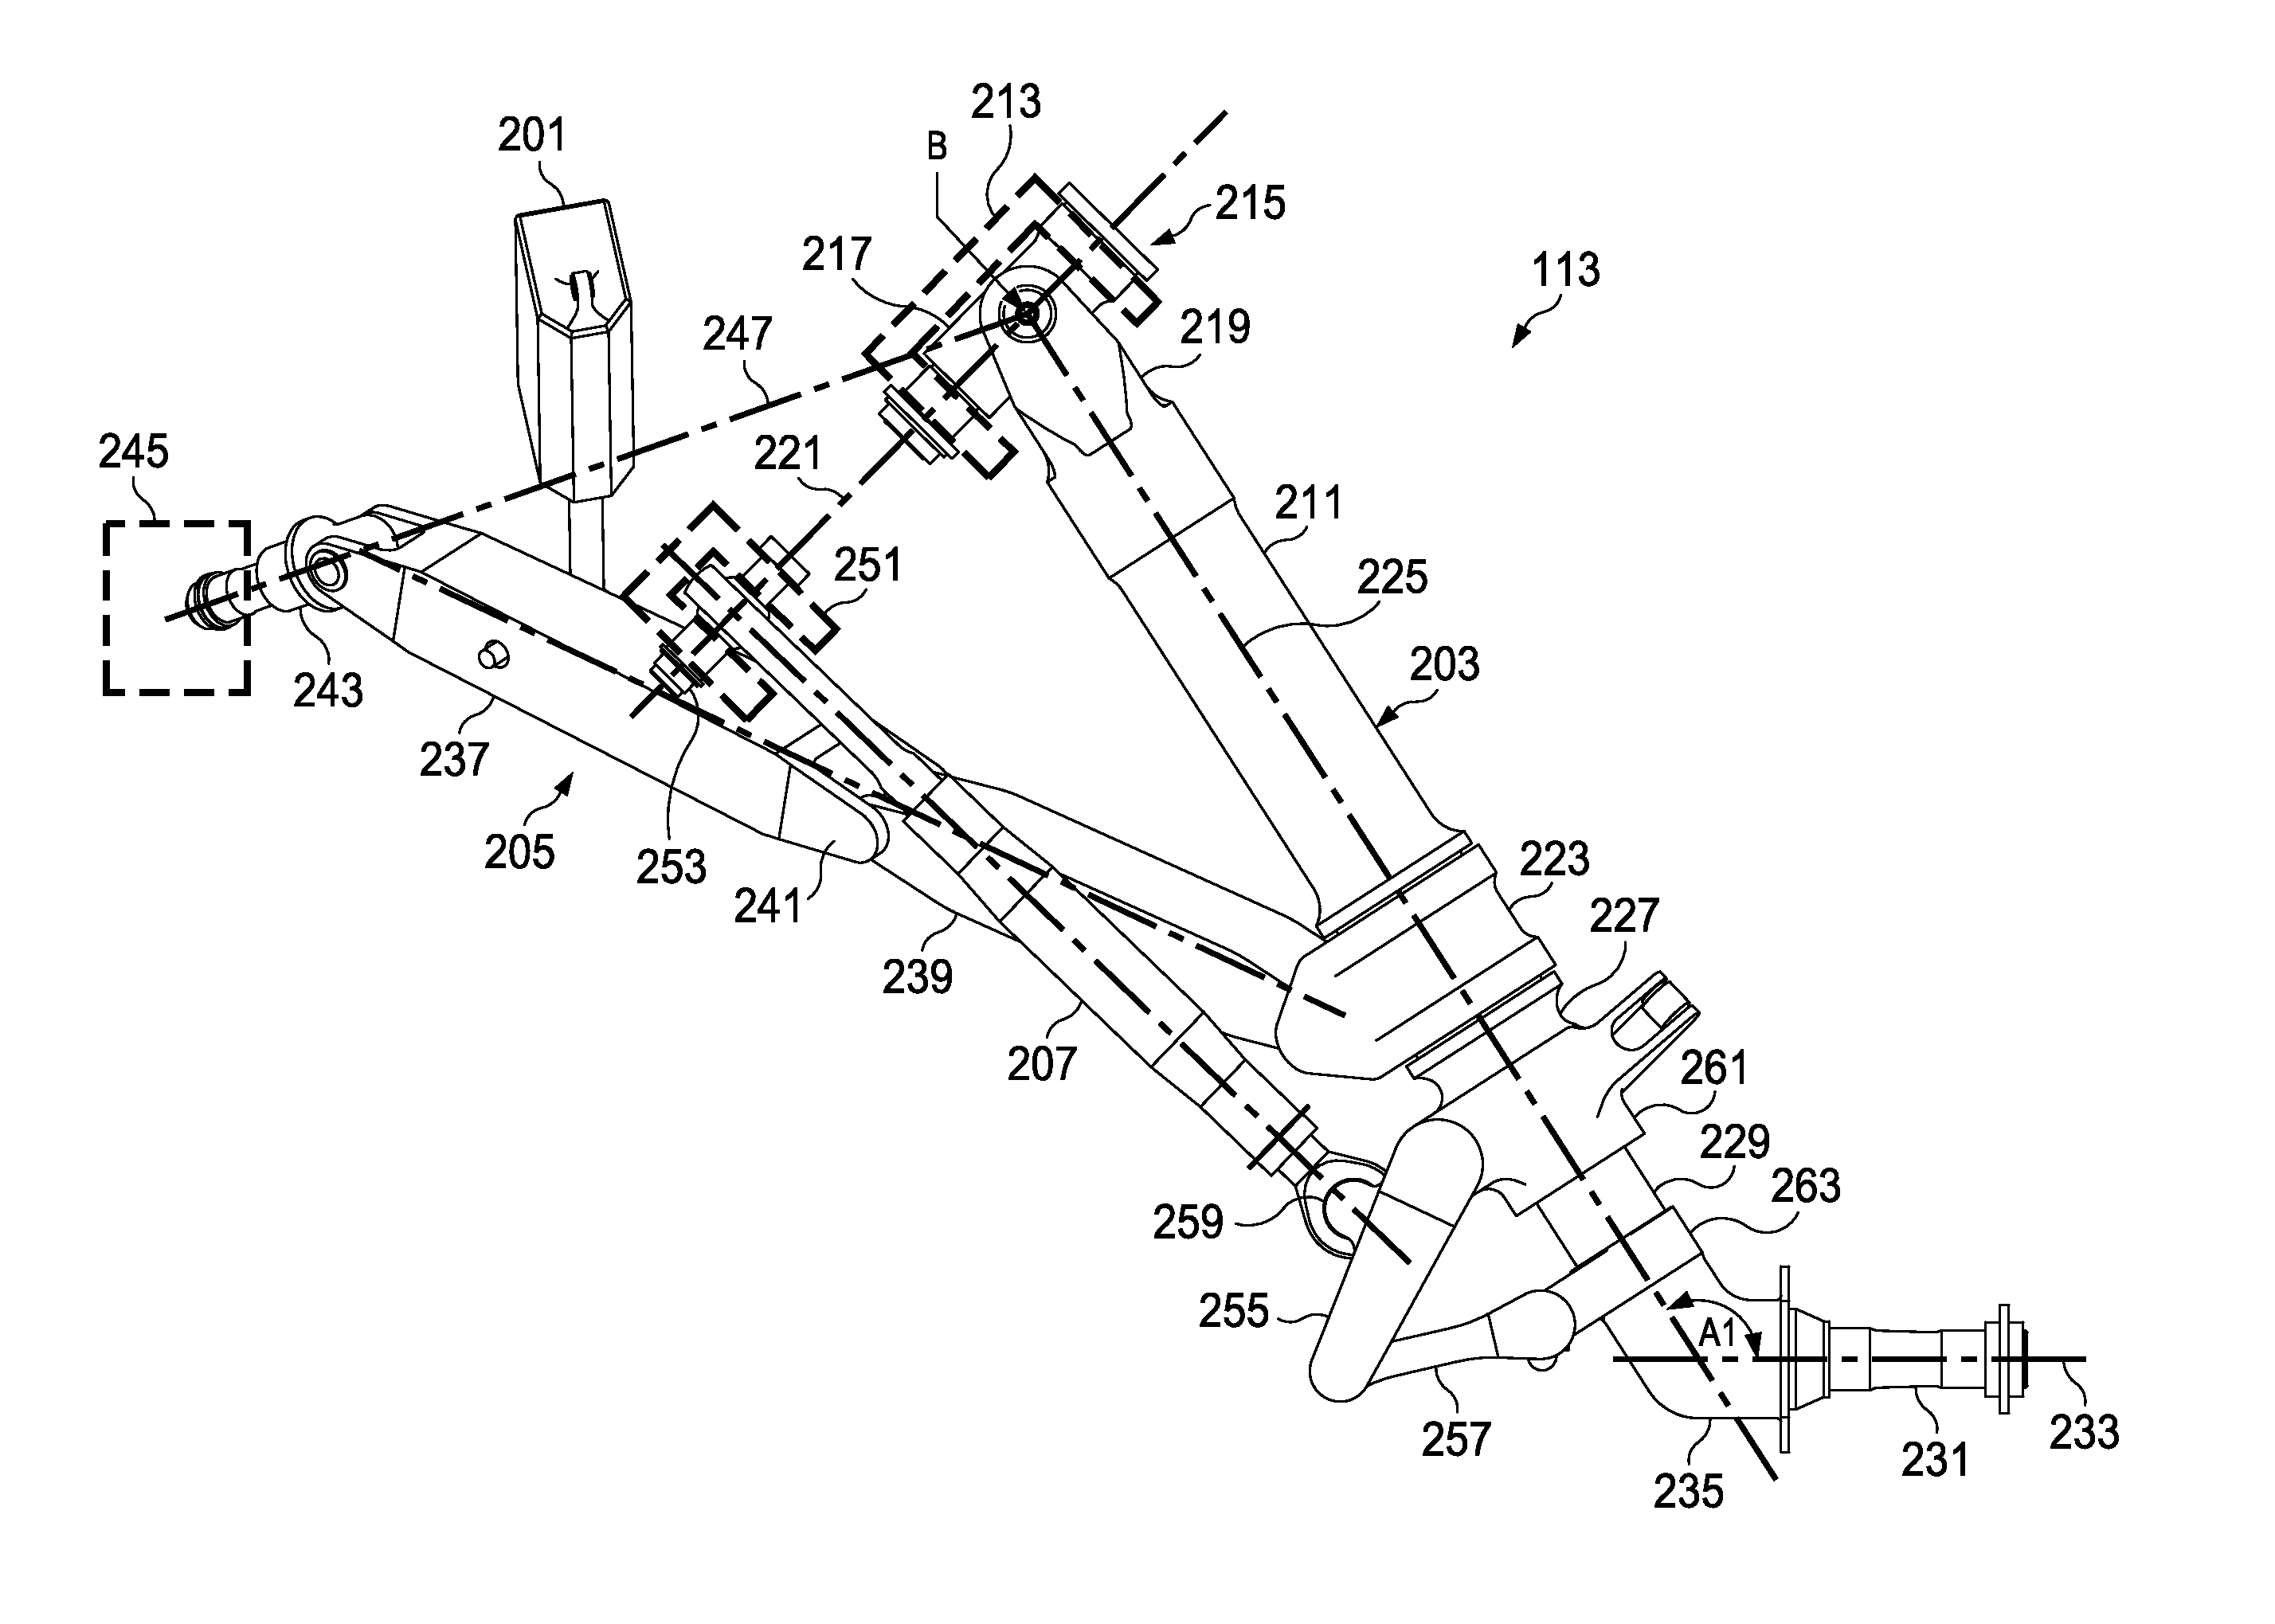 Semi-levered articulated landing gear system